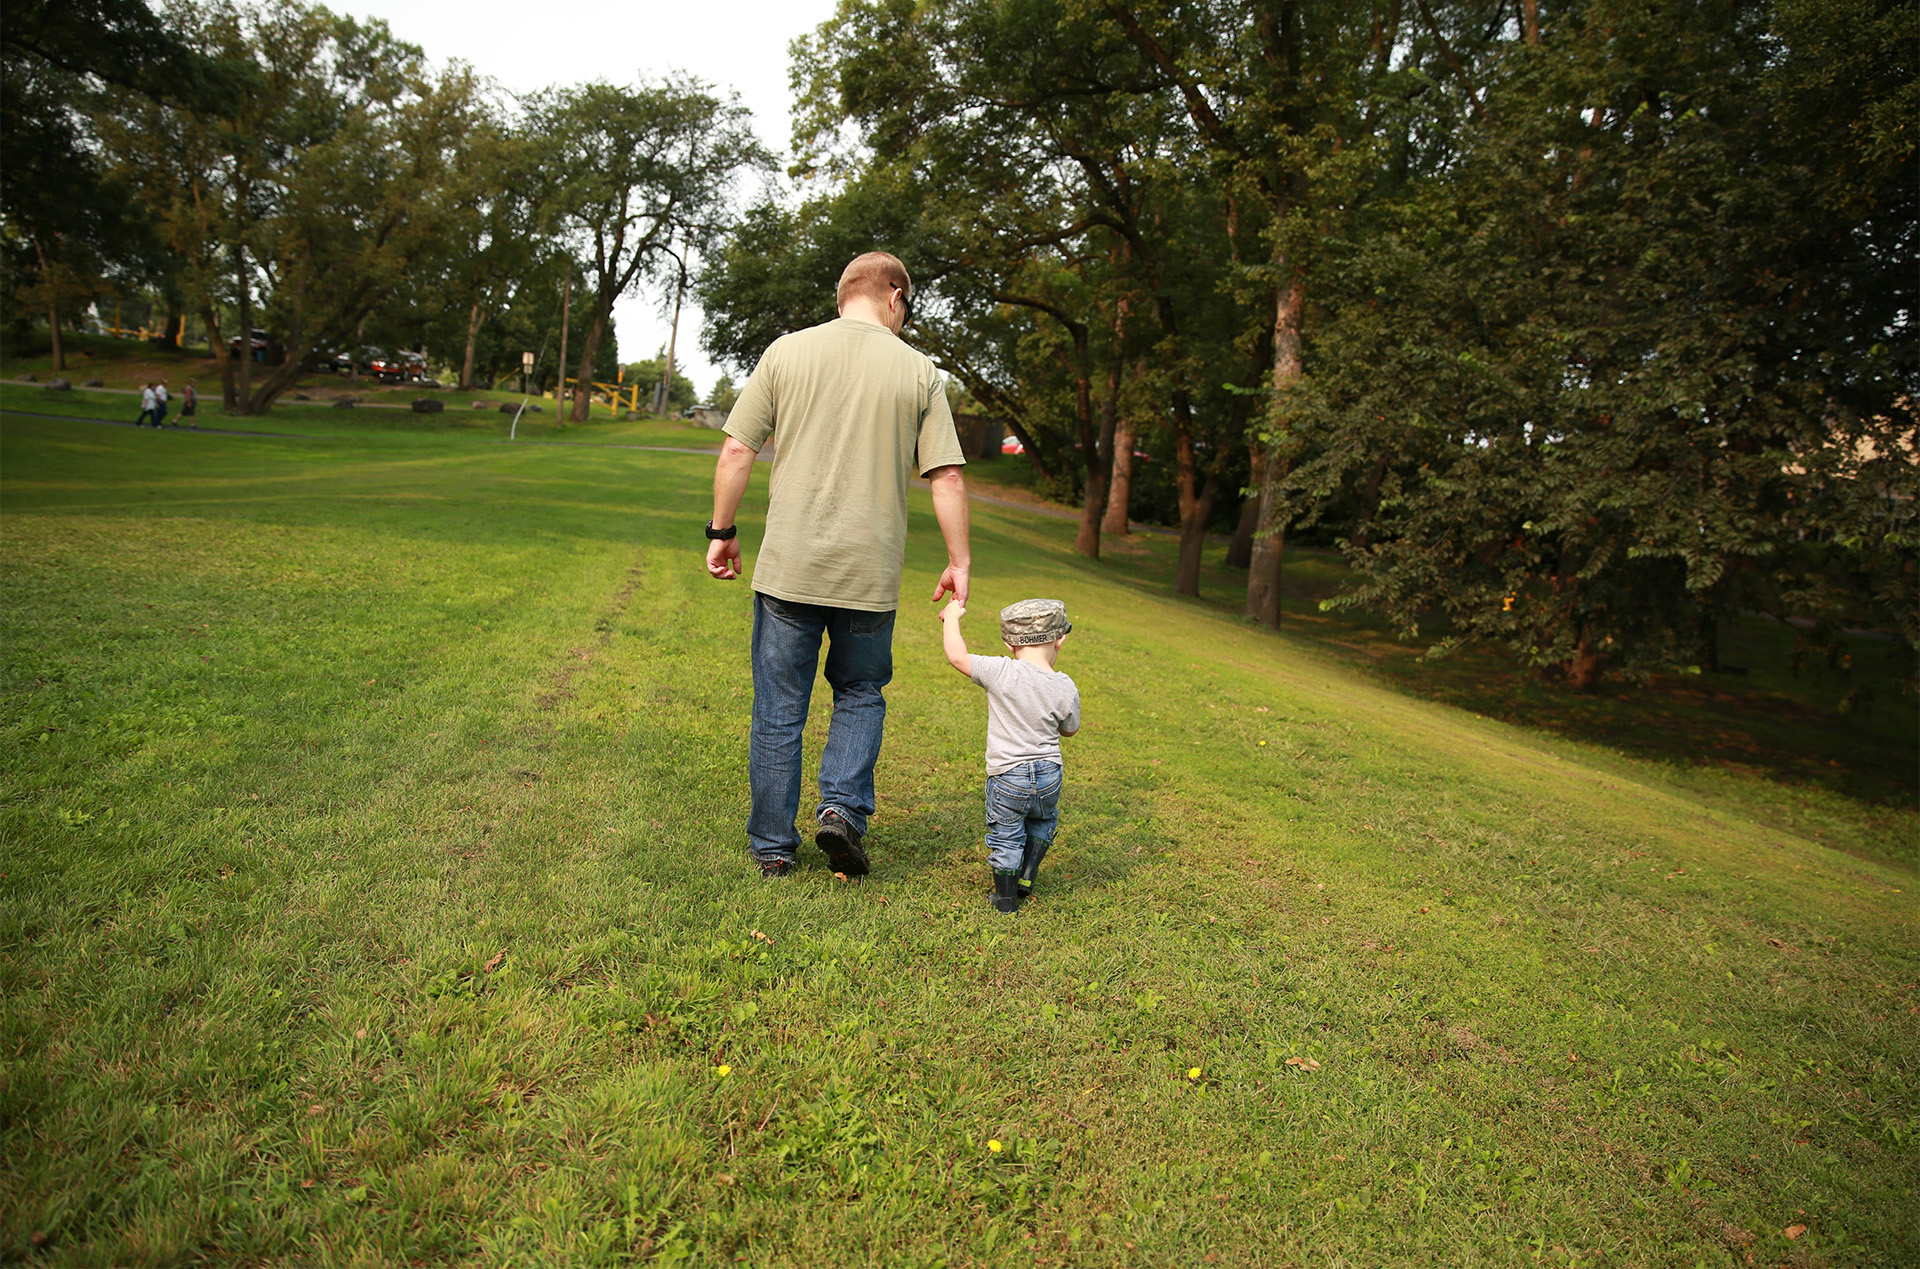 Dan Bohmer taking a walk with his grandson in a park